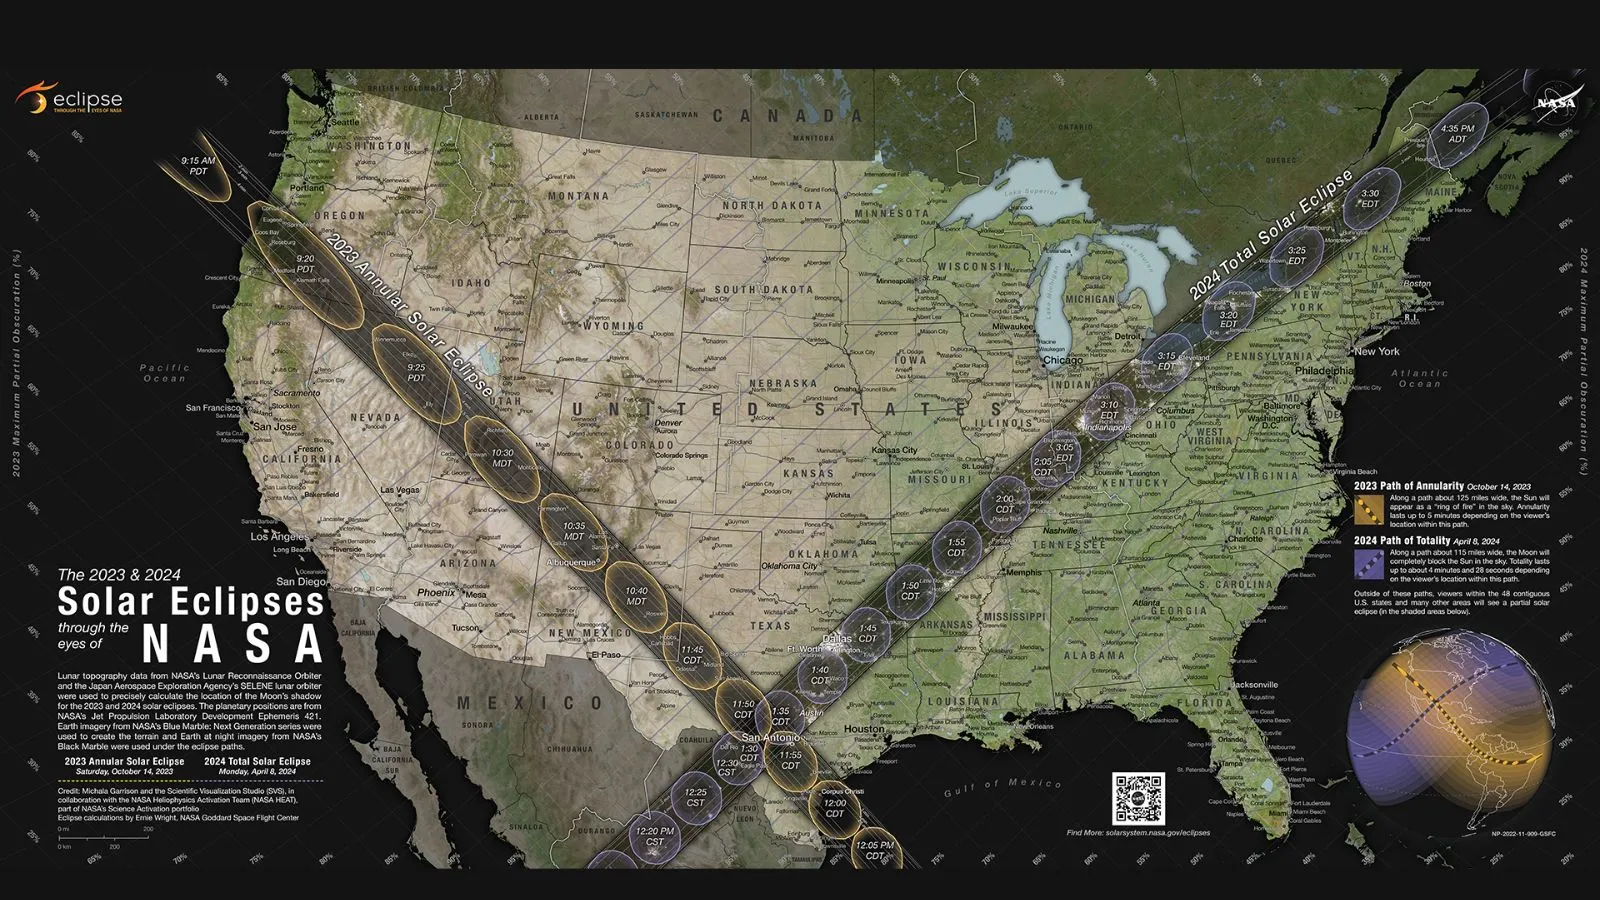 This NASA map shows what time the total eclipse will be visible in different parts of the United States.